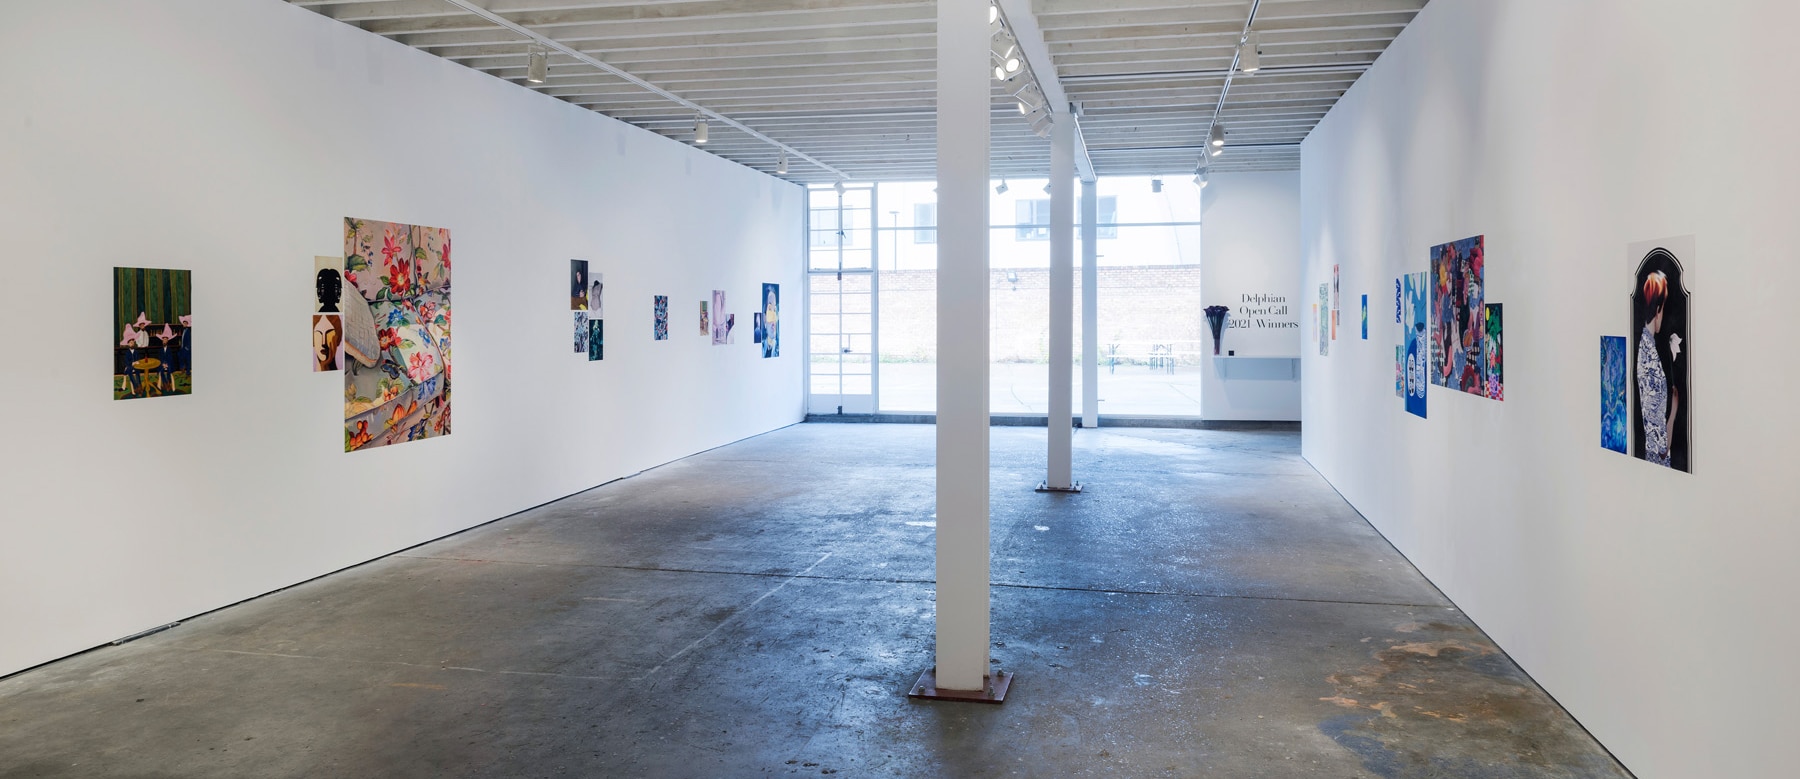 Installation view of the Delphian Open Call exhibition 2021 at Unit 1 Gallery in West London